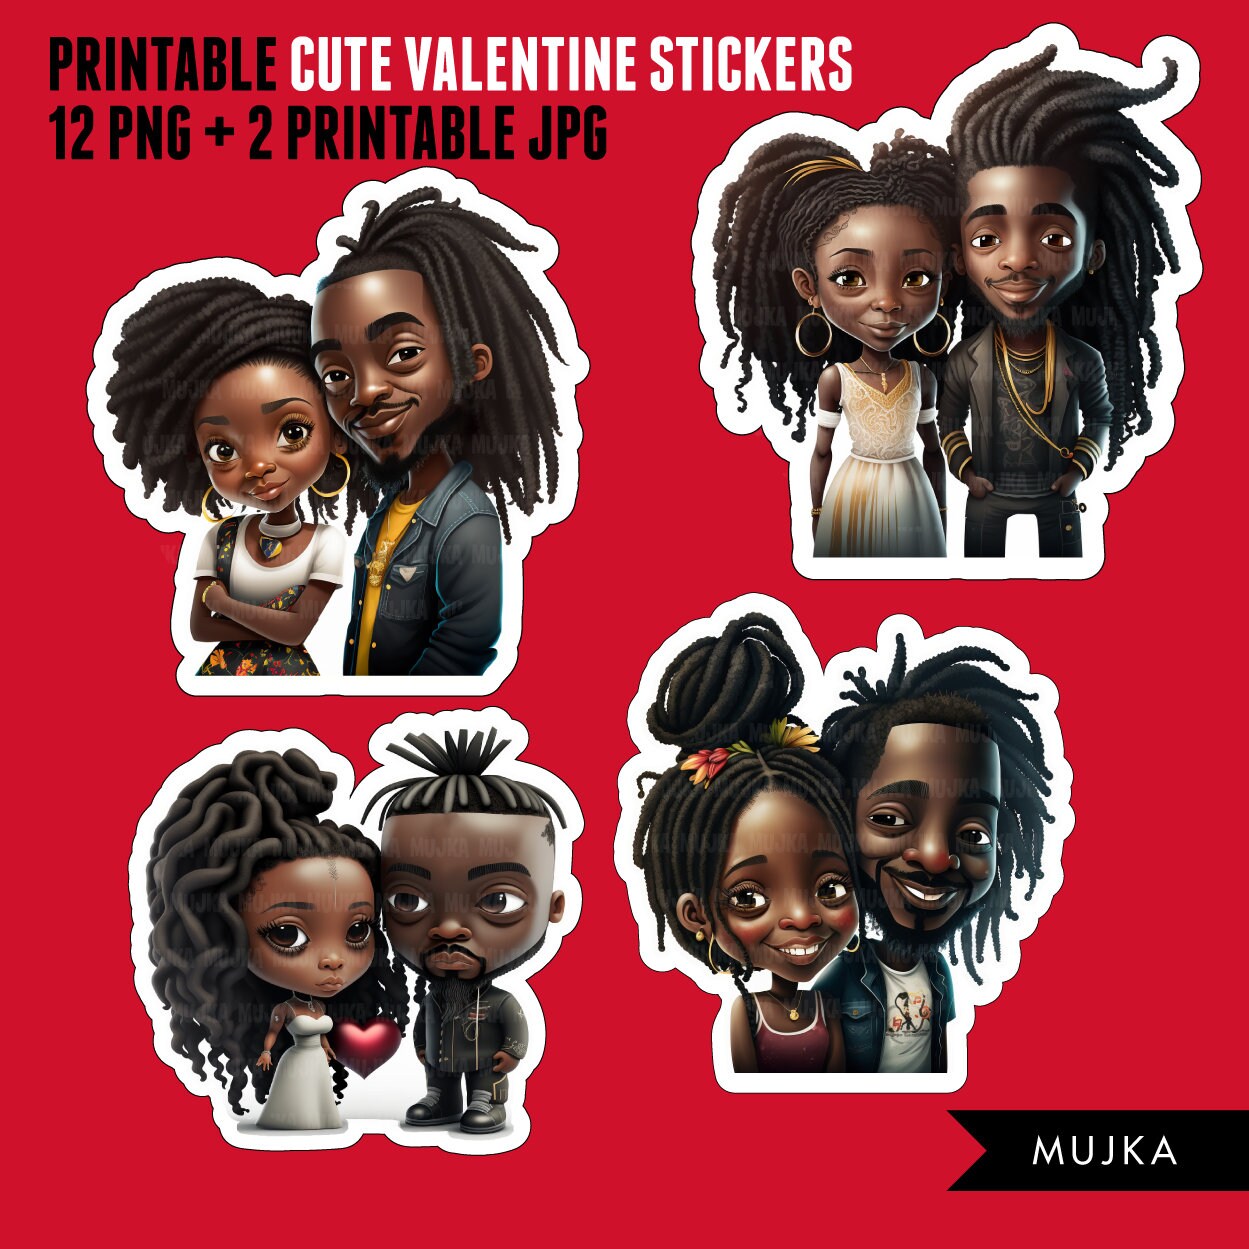 Valentine's Day stickers, Cute black couples stickers, couples png, valentine clipart, valentine, printable stickers, valentines day gifts